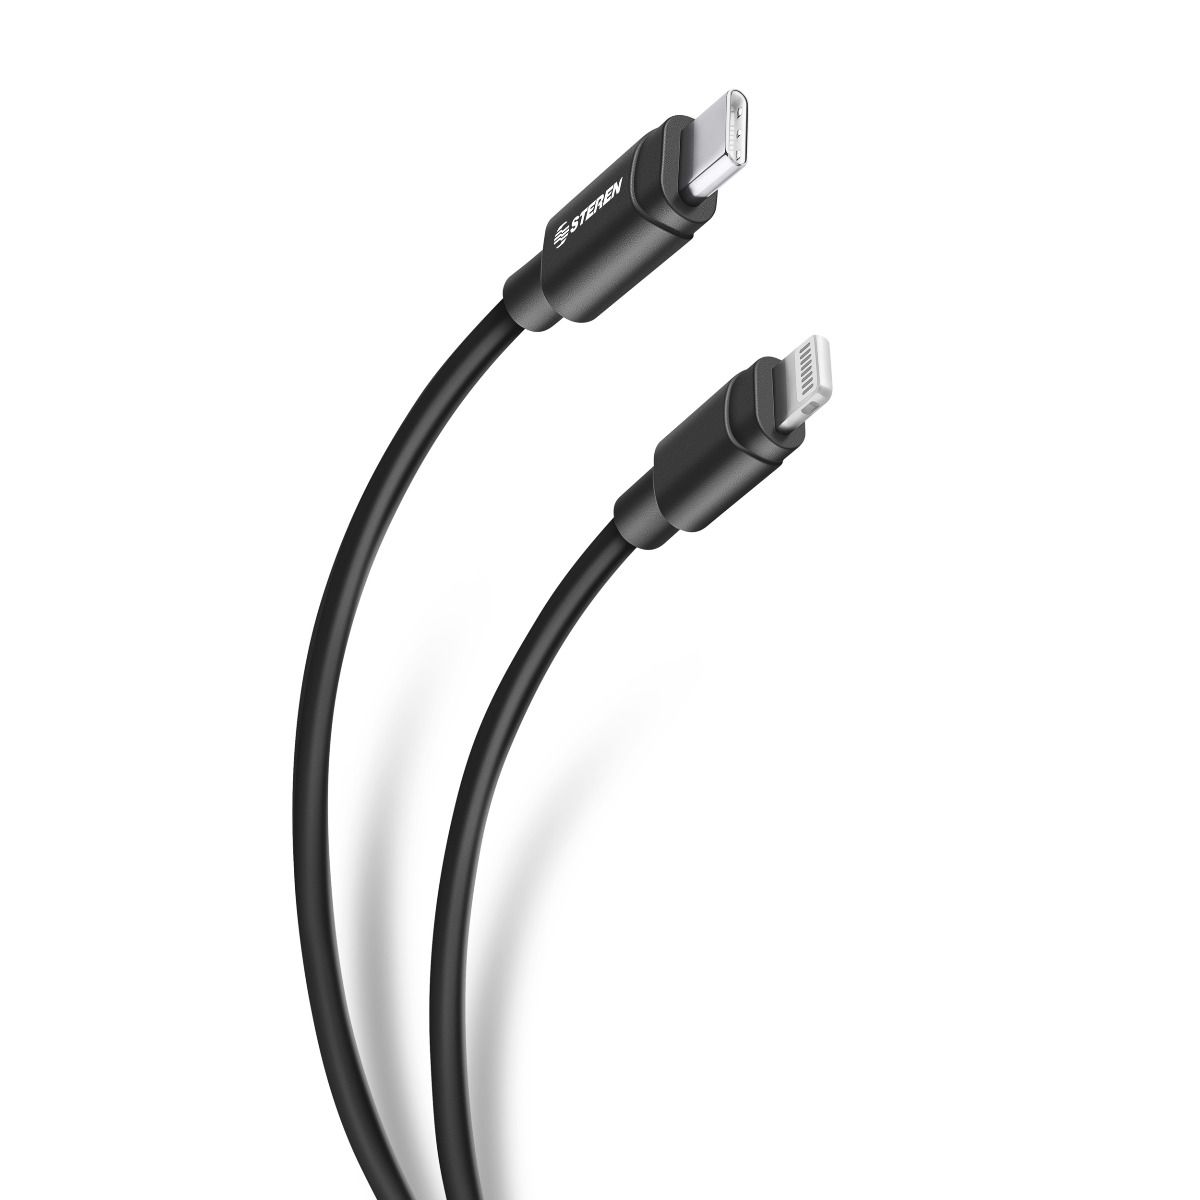 Cable Lightning tipo C a entrada IPhone